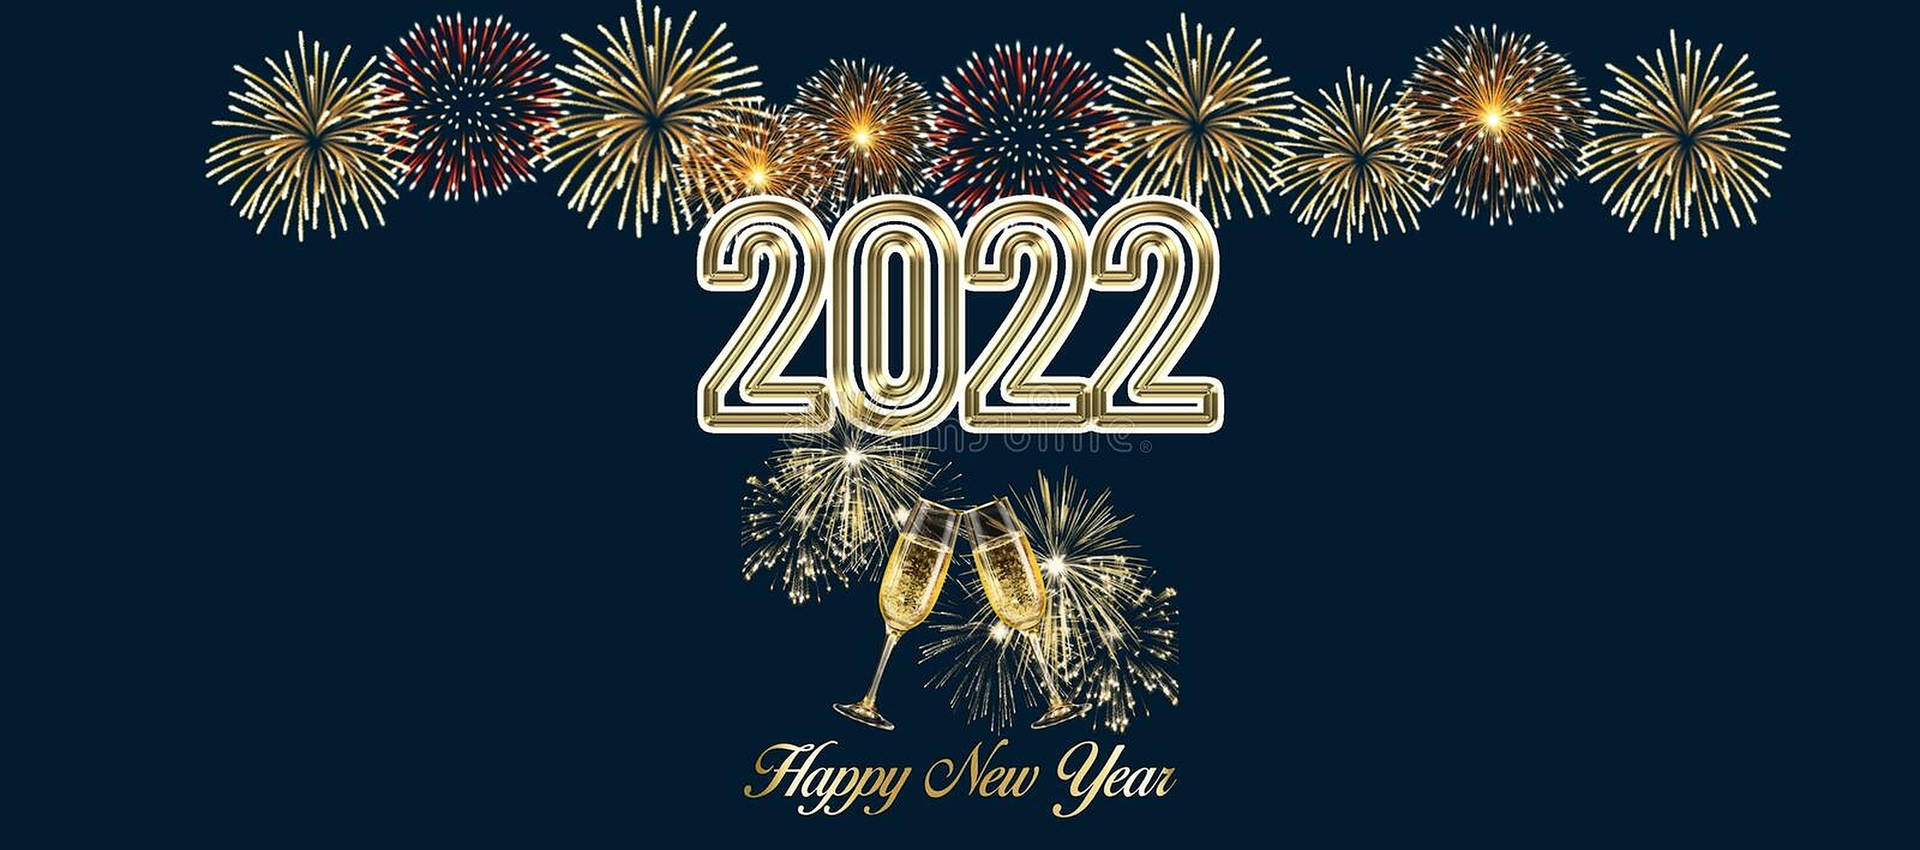 Happy New Year 2022 Champagne Wallpaper